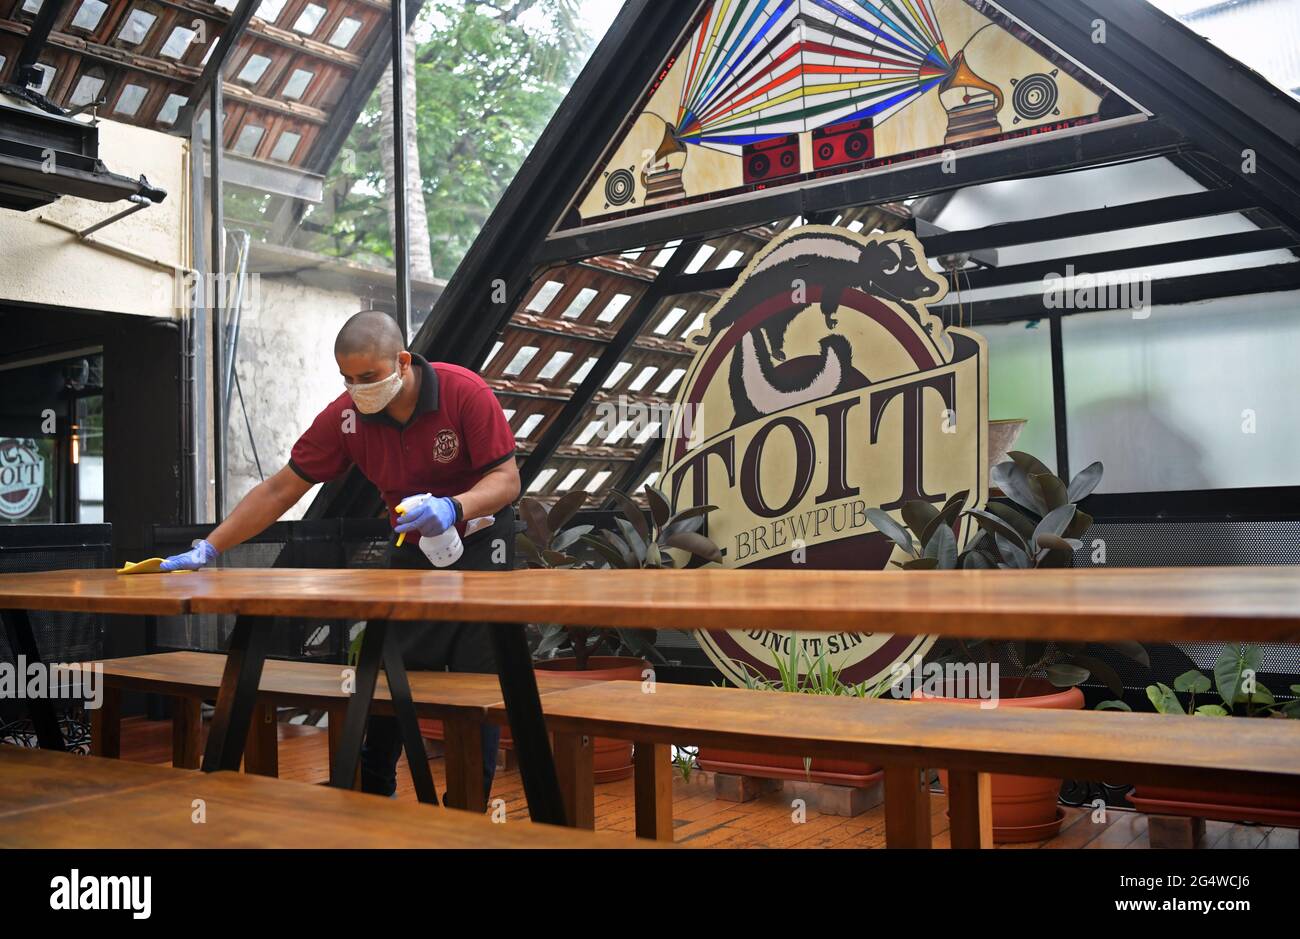 Toit Brewpub is one of the first microbreweries that opened in Bengaluru. Due to the pandemic, all pubs and restaurants had to close because a lockdown was imposed. Staff are sanitizing the place as the restrictions have now been lifted. Bengaluru, India. Stock Photo